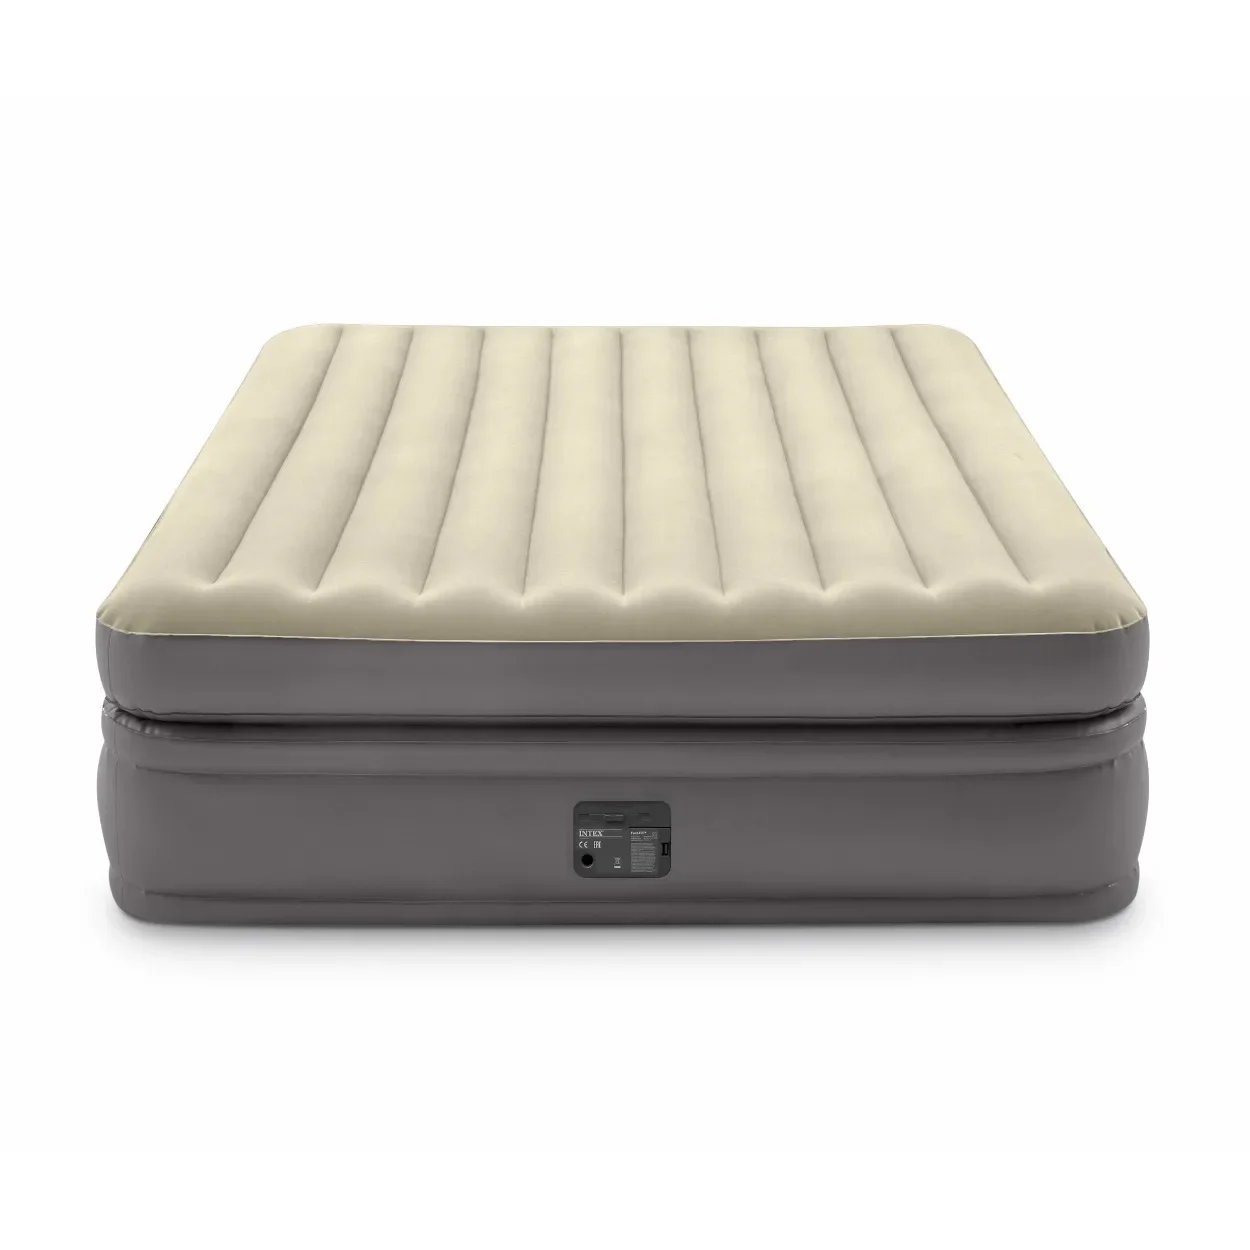 INTEX 64164 inflatable khaki double airbed with built-in electric-pump flocked camping mattress for indoor &outdoor